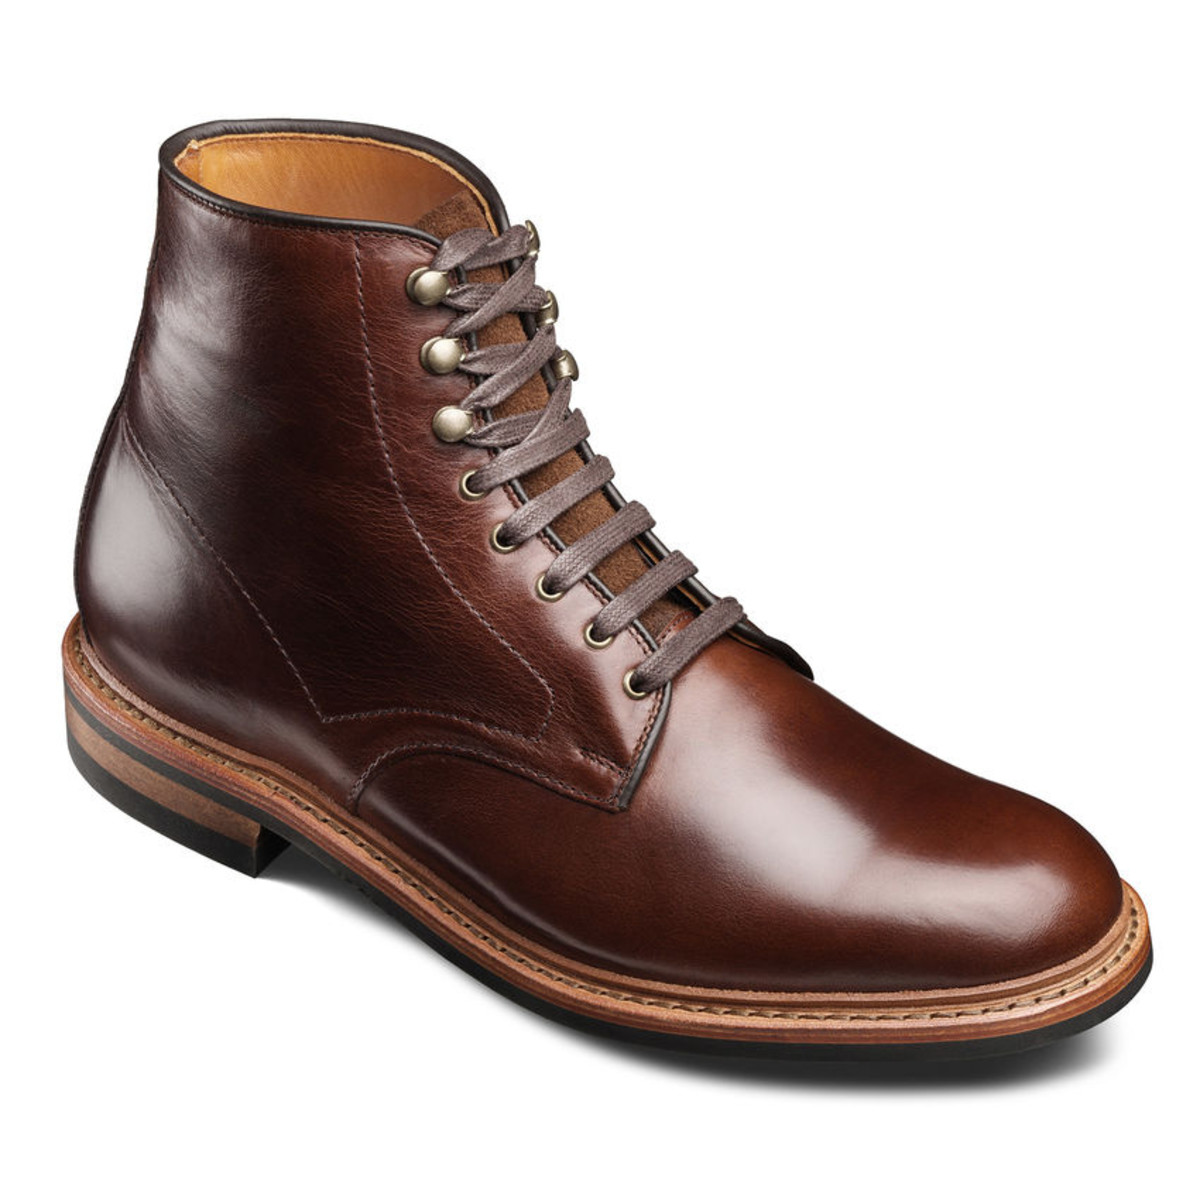 10 Perfect Fall Boots - Men's Journal